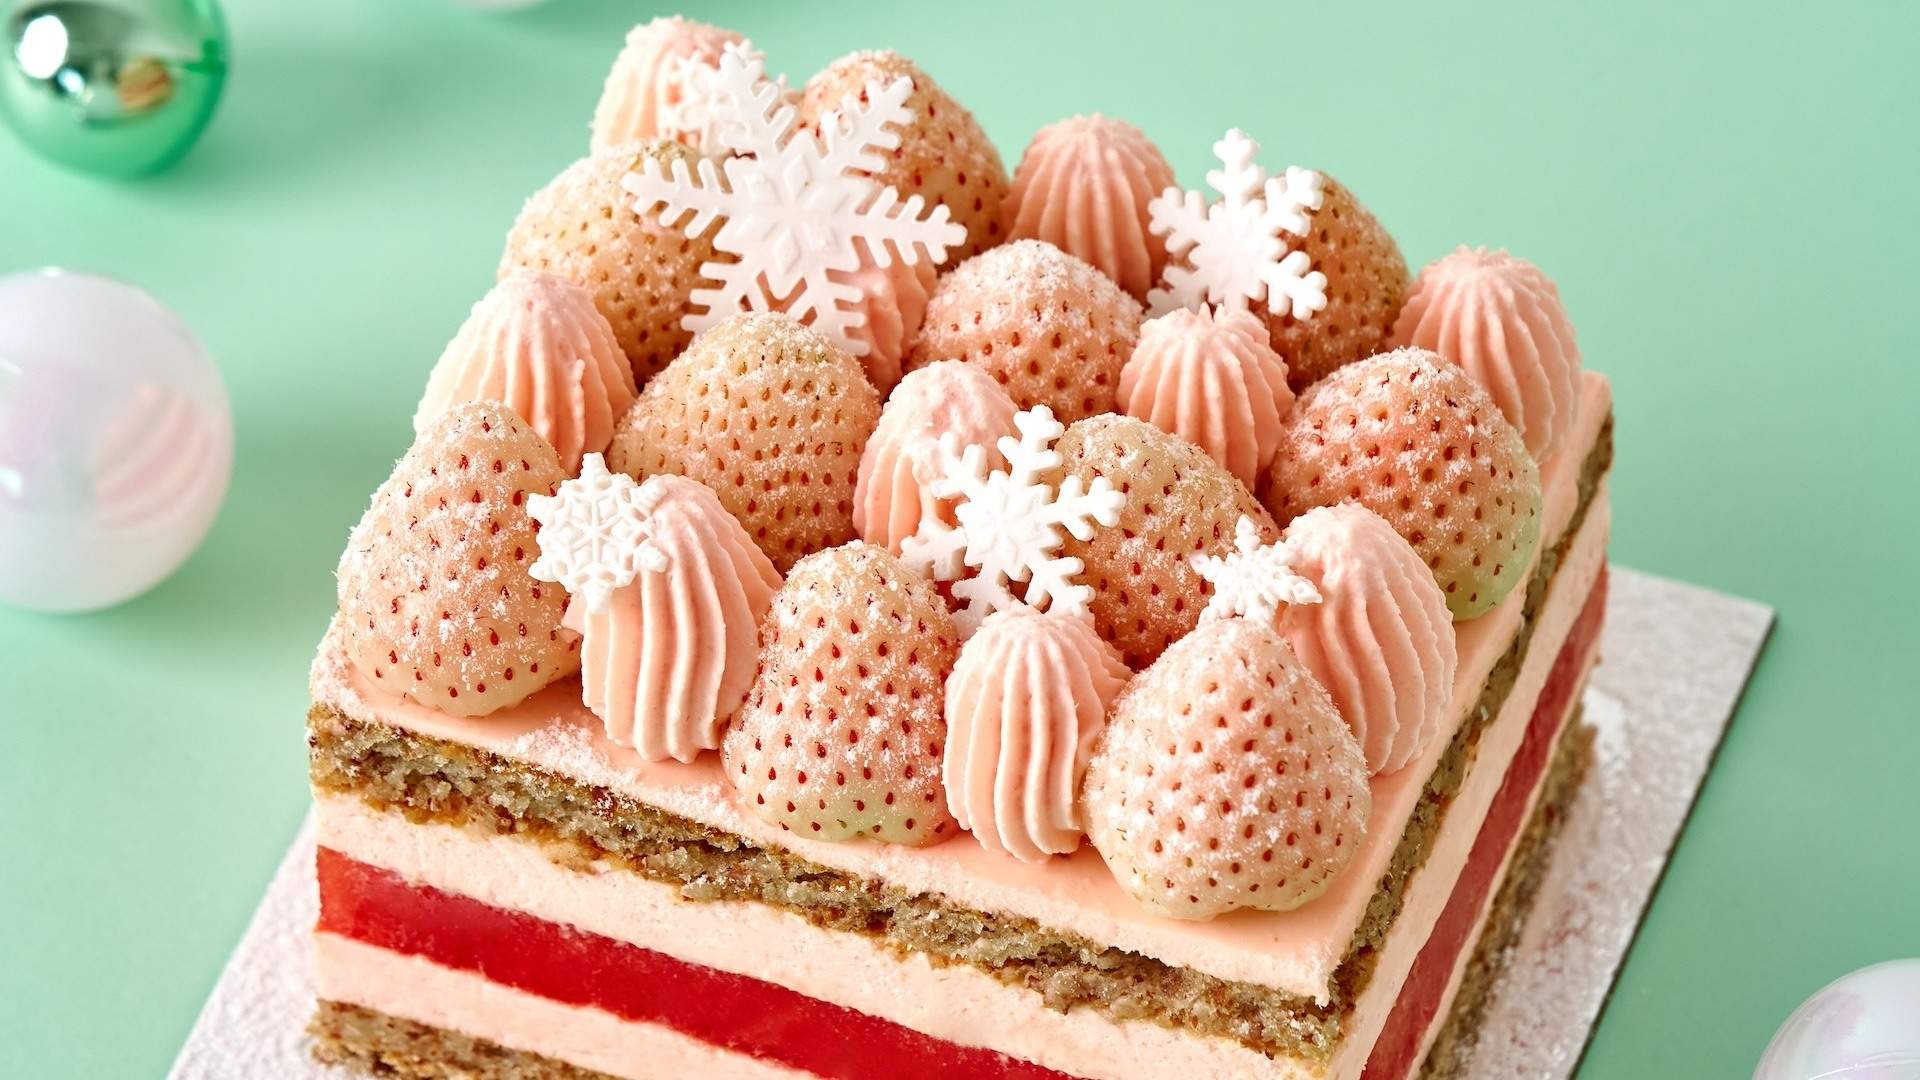 Black Star Pastry Is Serving Up a Christmas Edition of Its Insta-Favourite Strawberry Watermelon Cake